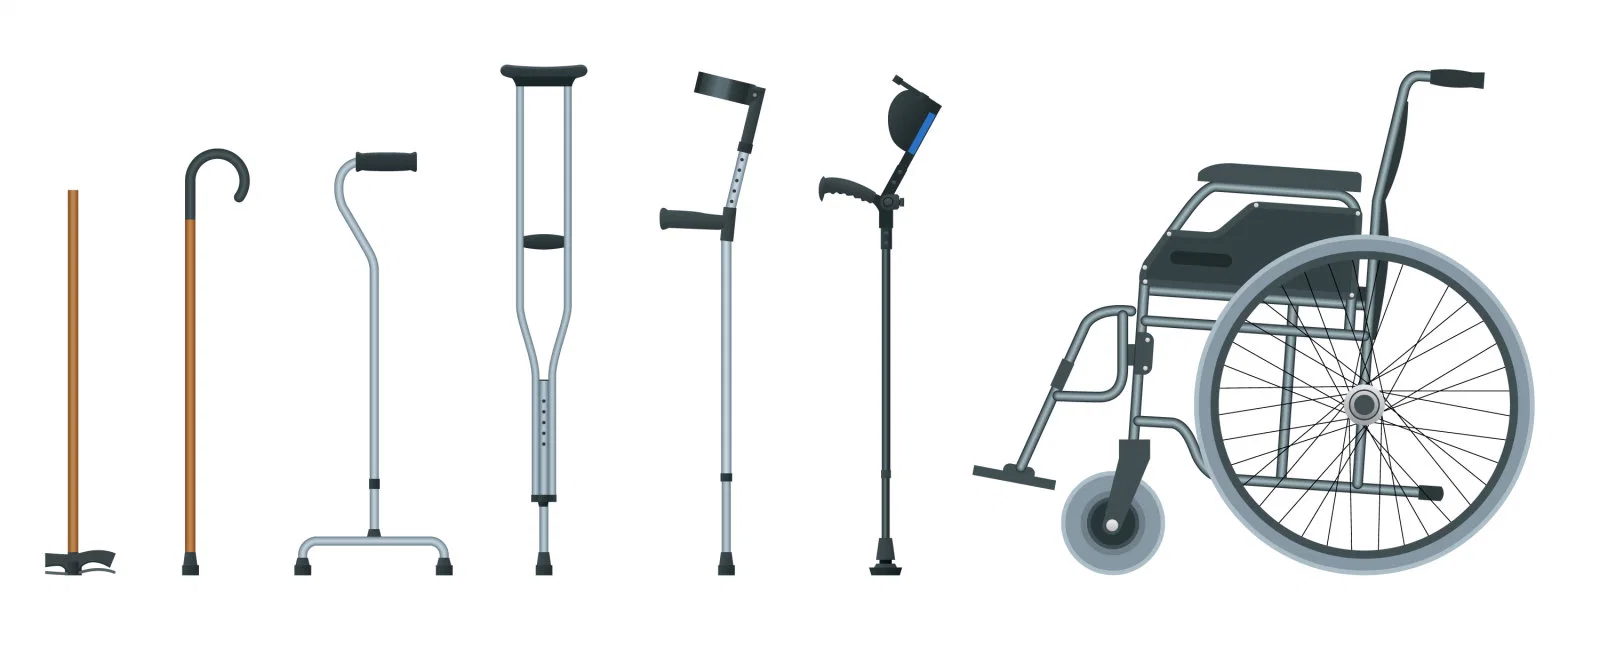 Carton Outdoor Brother Medical Mobilty Canes for Teh Blind Aluminum Crutches